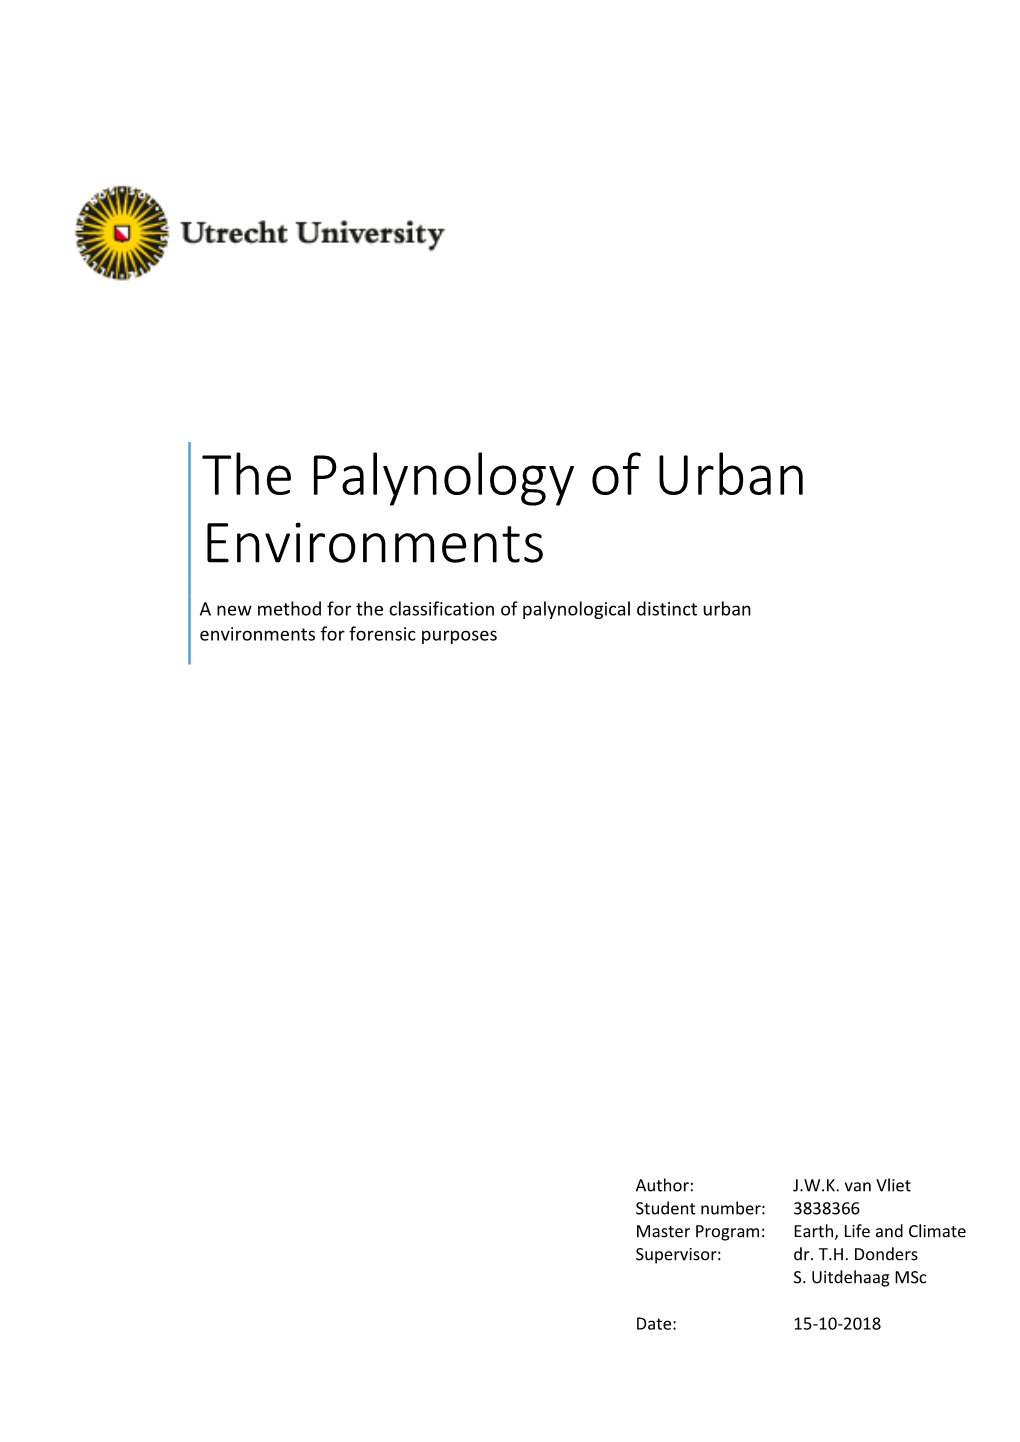 The Palynology of Urban Environments a New Method for the Classification of Palynological Distinct Urban Environments for Forensic Purposes